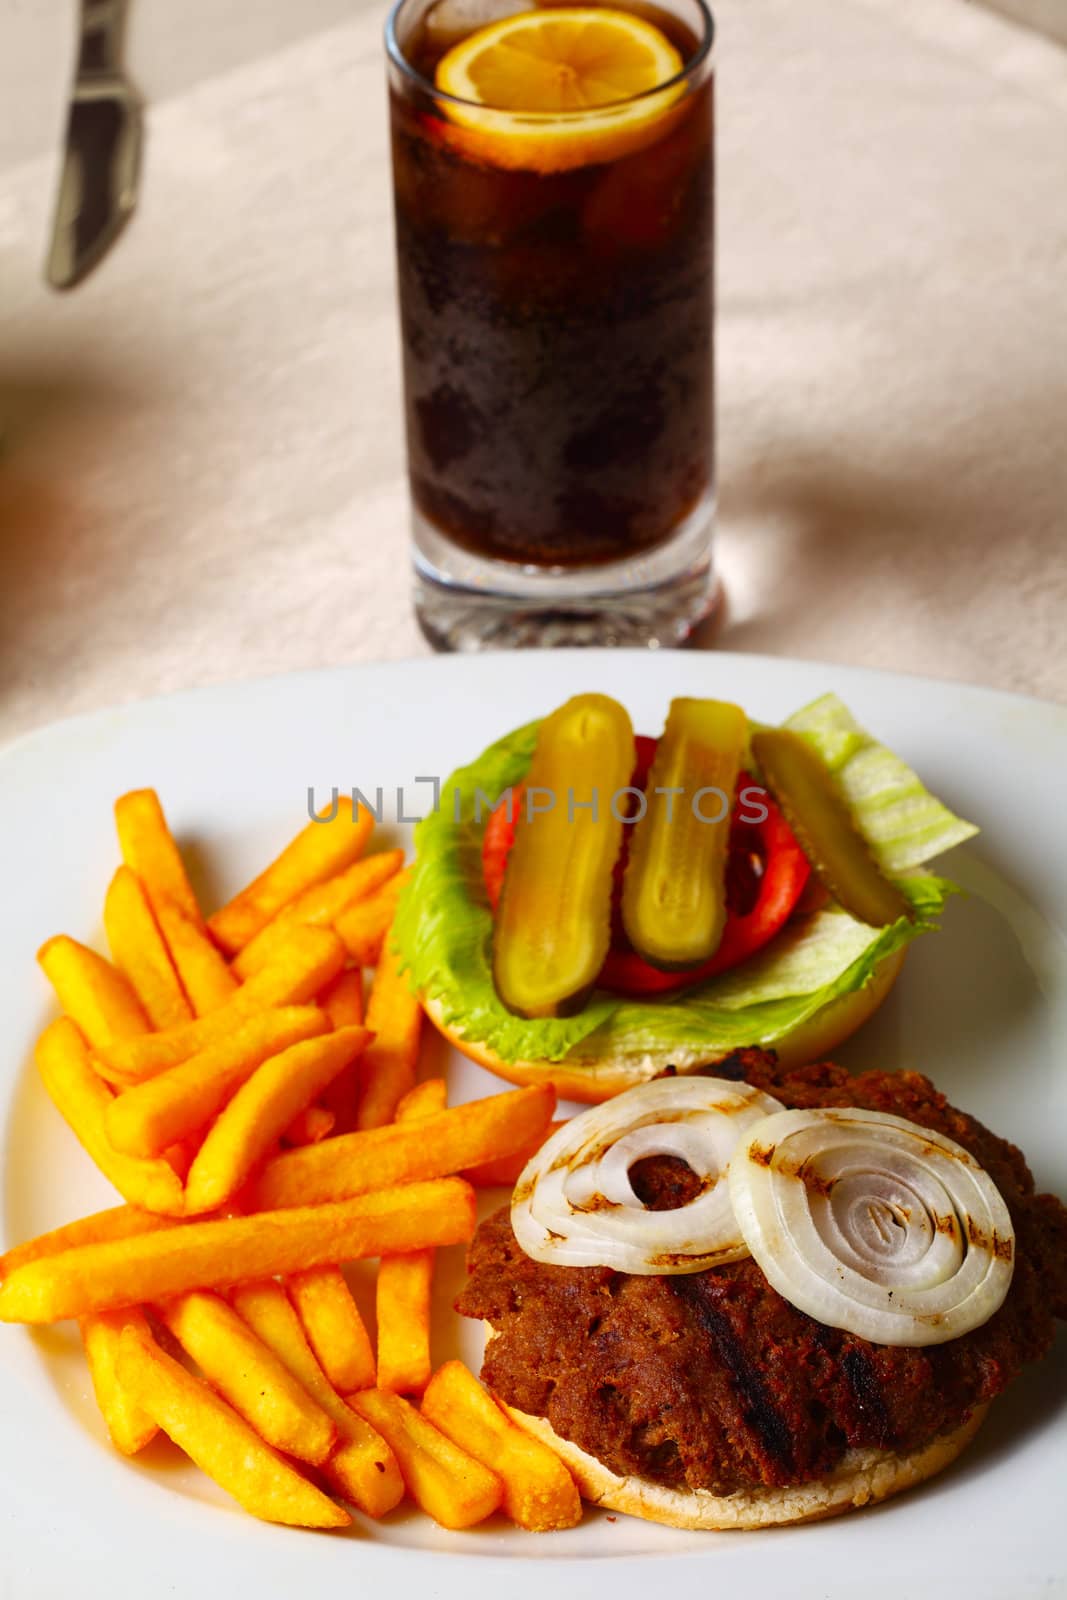 Open hamburger and french fries by shamtor